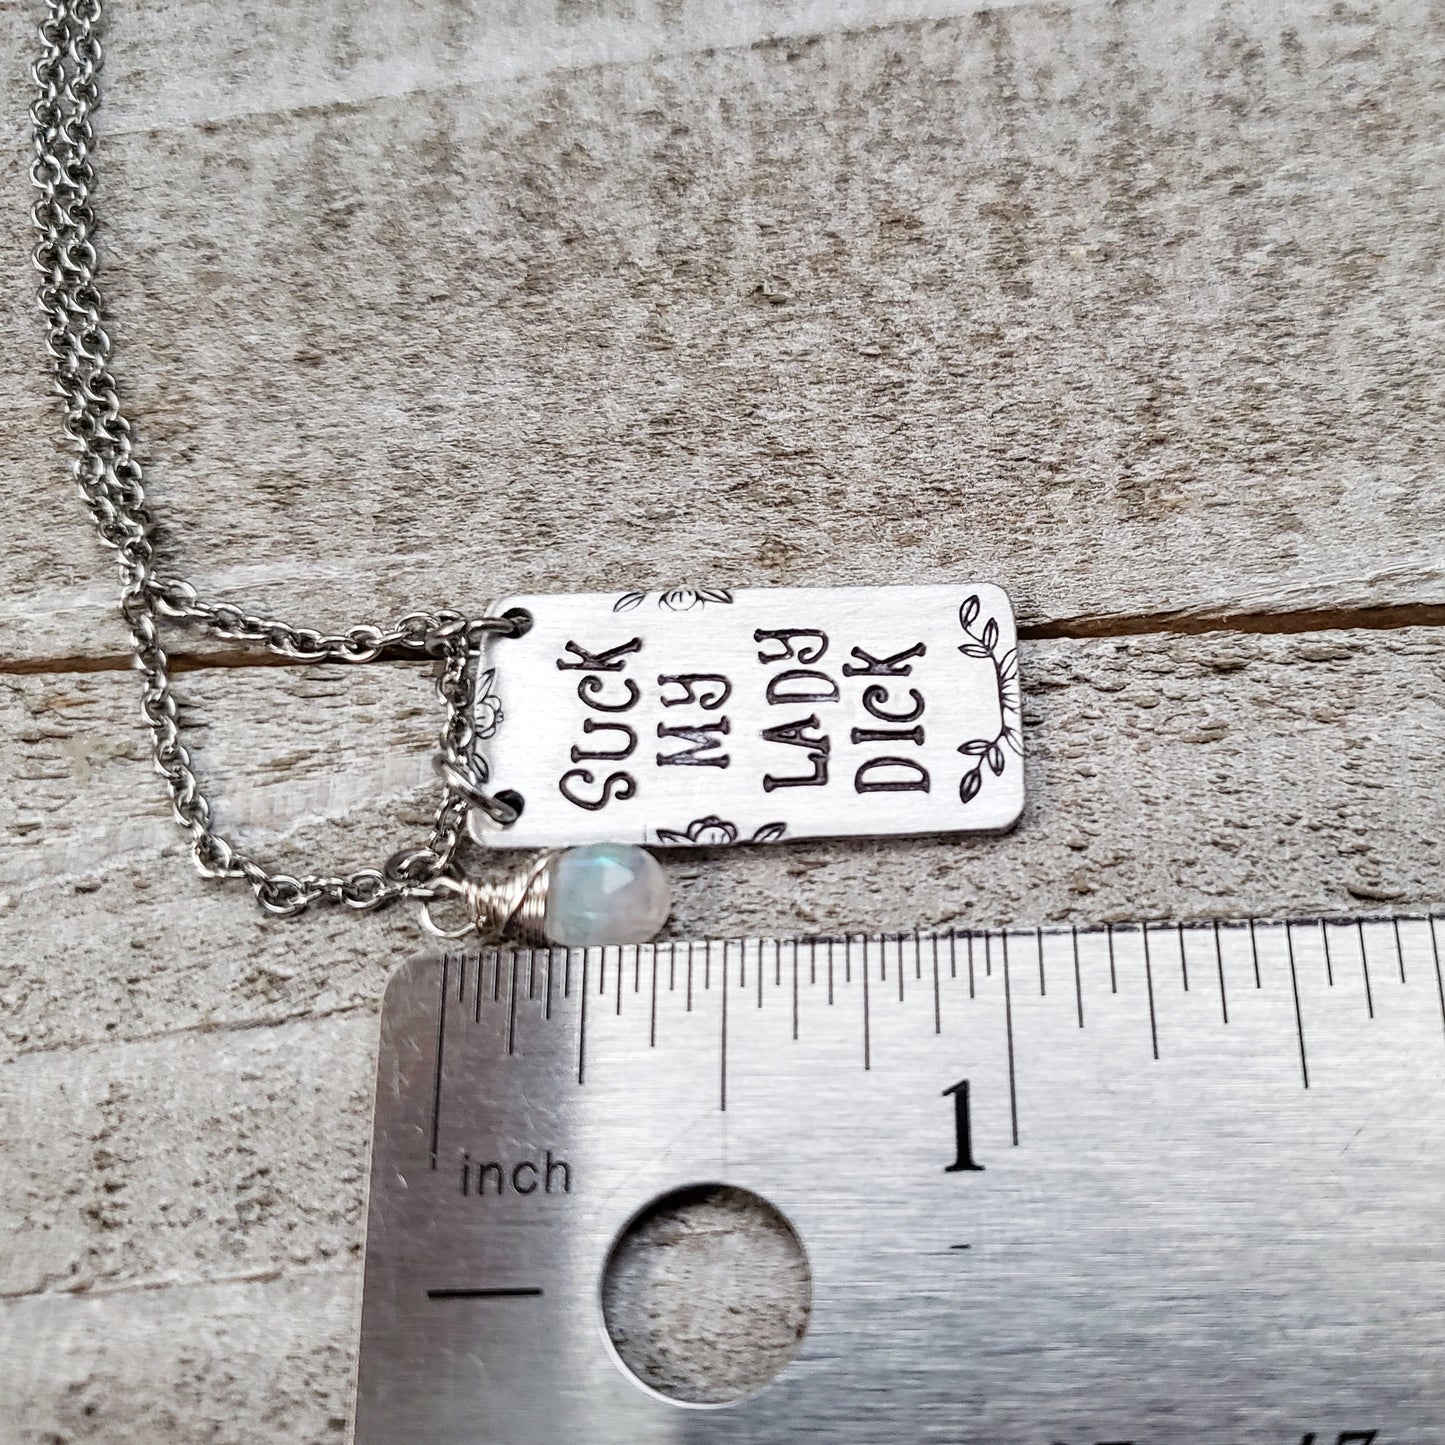 Suck my lady dick necklace